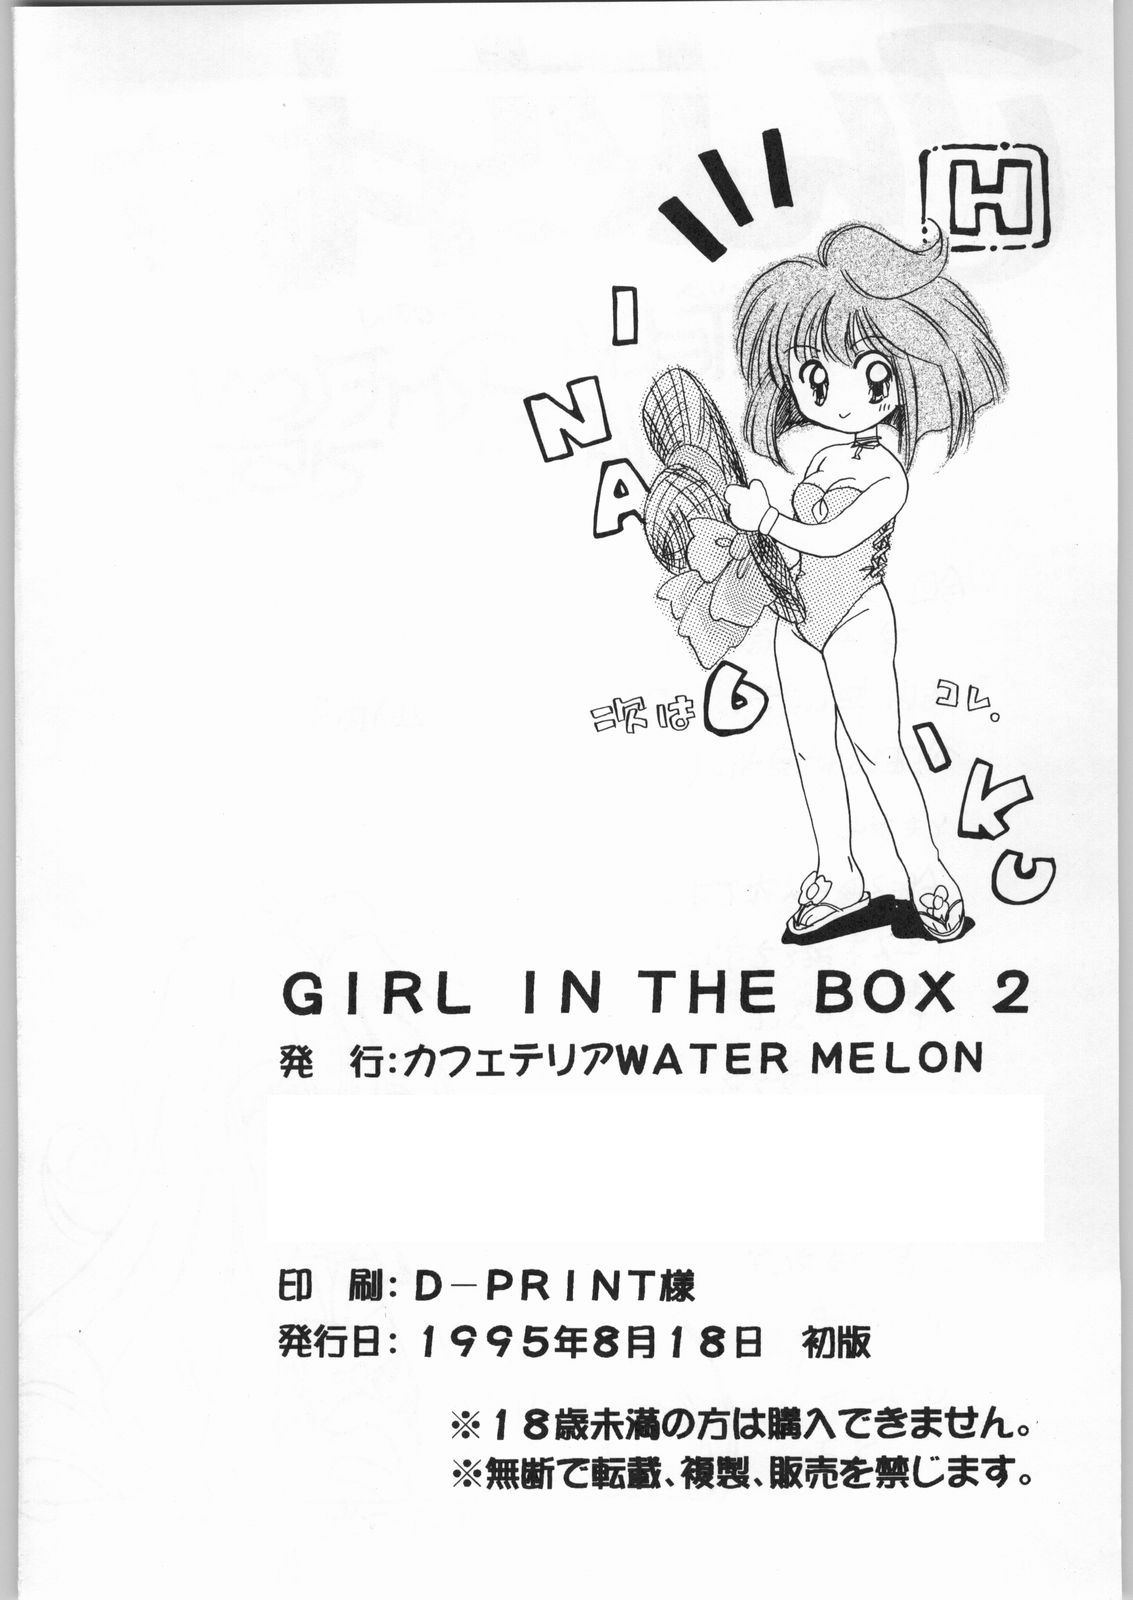 [Various] Girl in the Box 2 (Cafeteria Watermelon) [カフェテリアWATERMELON] GIRL IN THE BOX 2